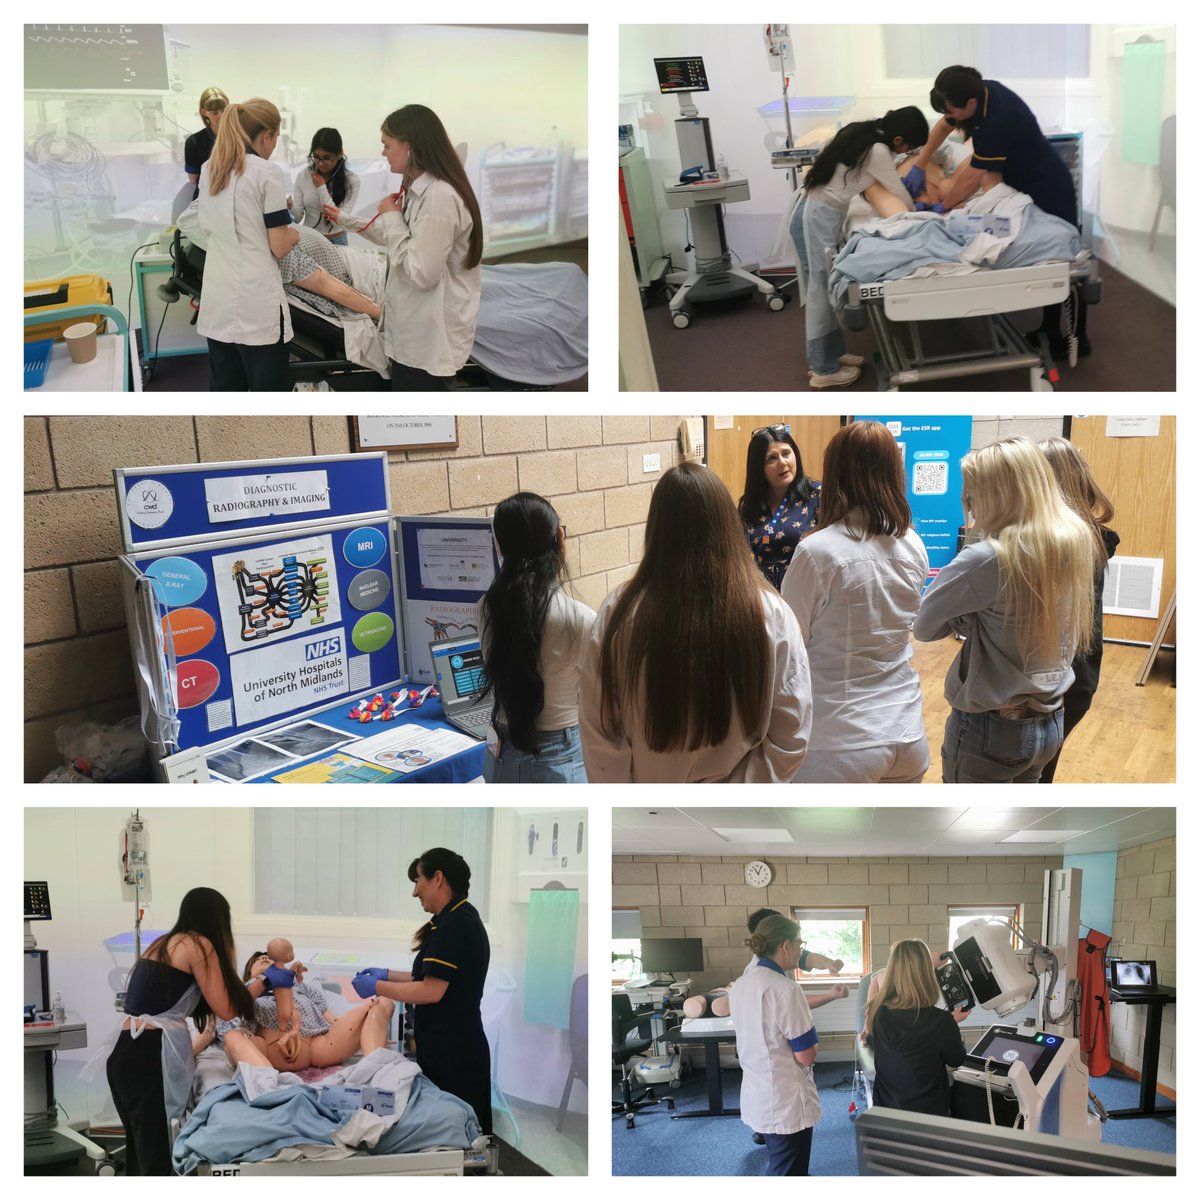 We welcomed health and social care 6th form students to our first ever simulation careers event last week. The students were able to get hands on experience of tasks they would do in various NHS roles such as nursing, physio, OT, radiography & midwifery
@UHNM_NHS
@Education_UHNM